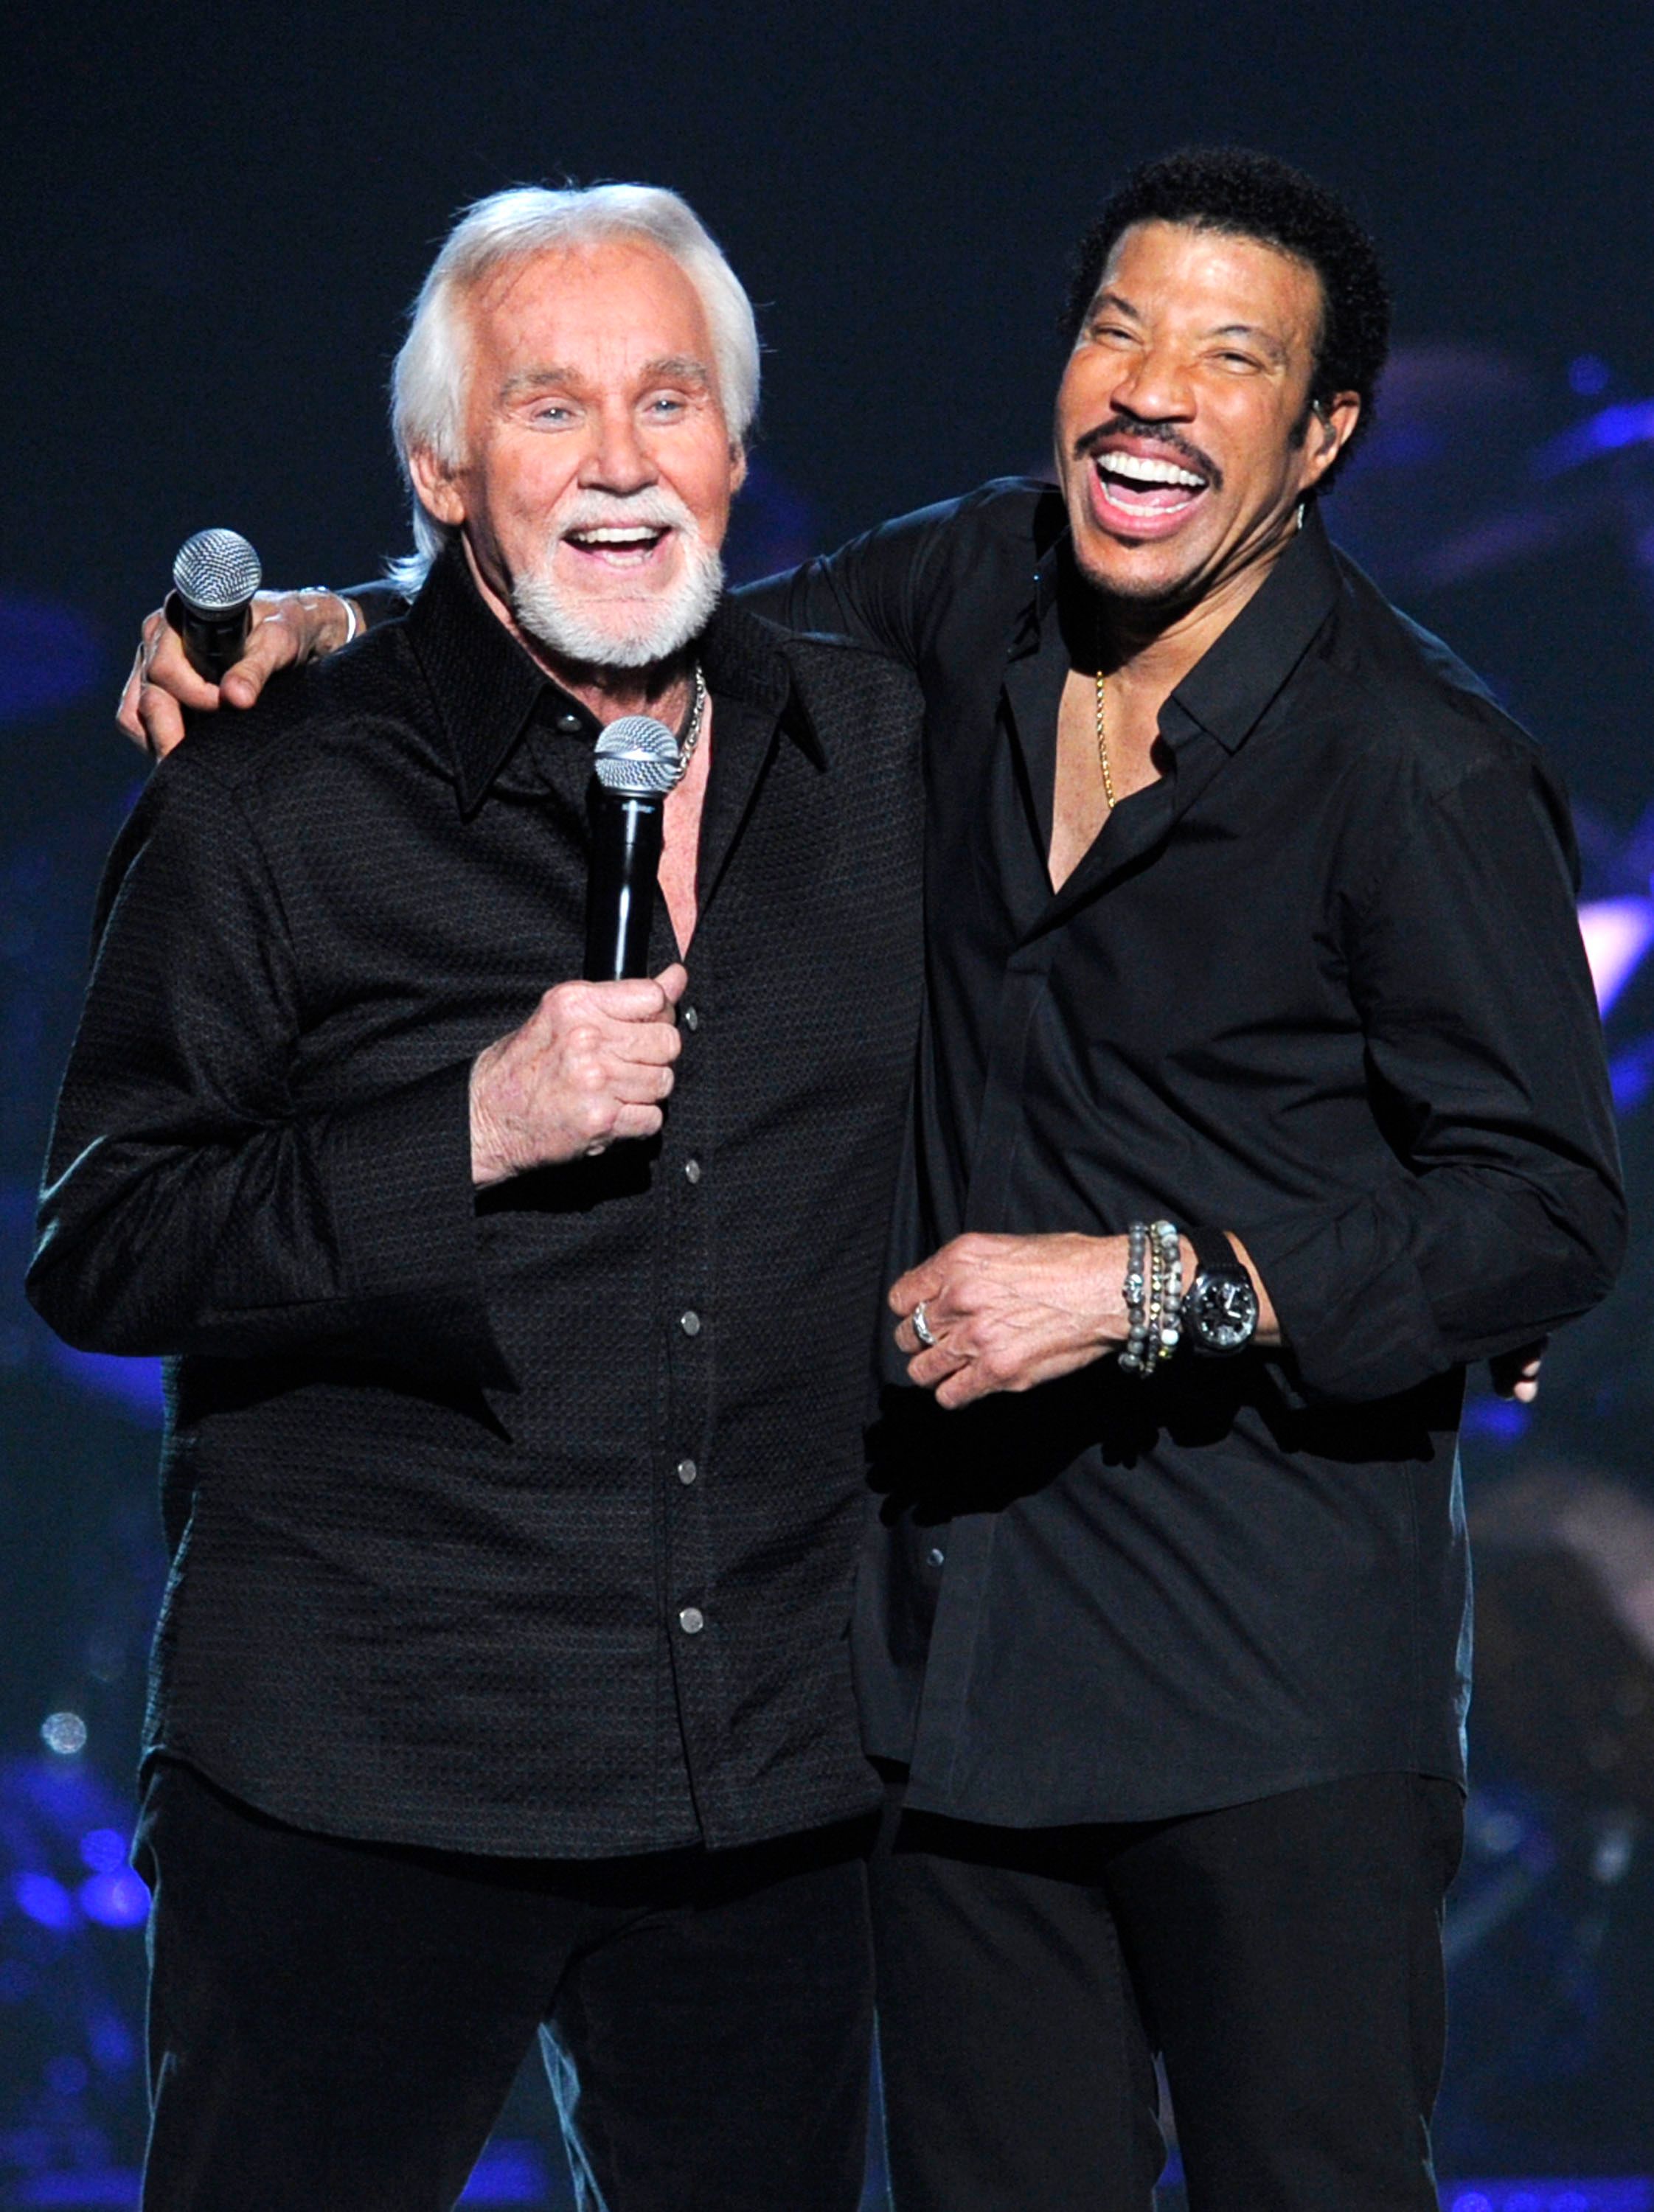 Kenny Rogers and Lionel Richie performed at Lionel Richie and Friends in Concert presented by ACM held at the MGM Grand Garden Arena on April 2, 2012. | Photo: Getty Images